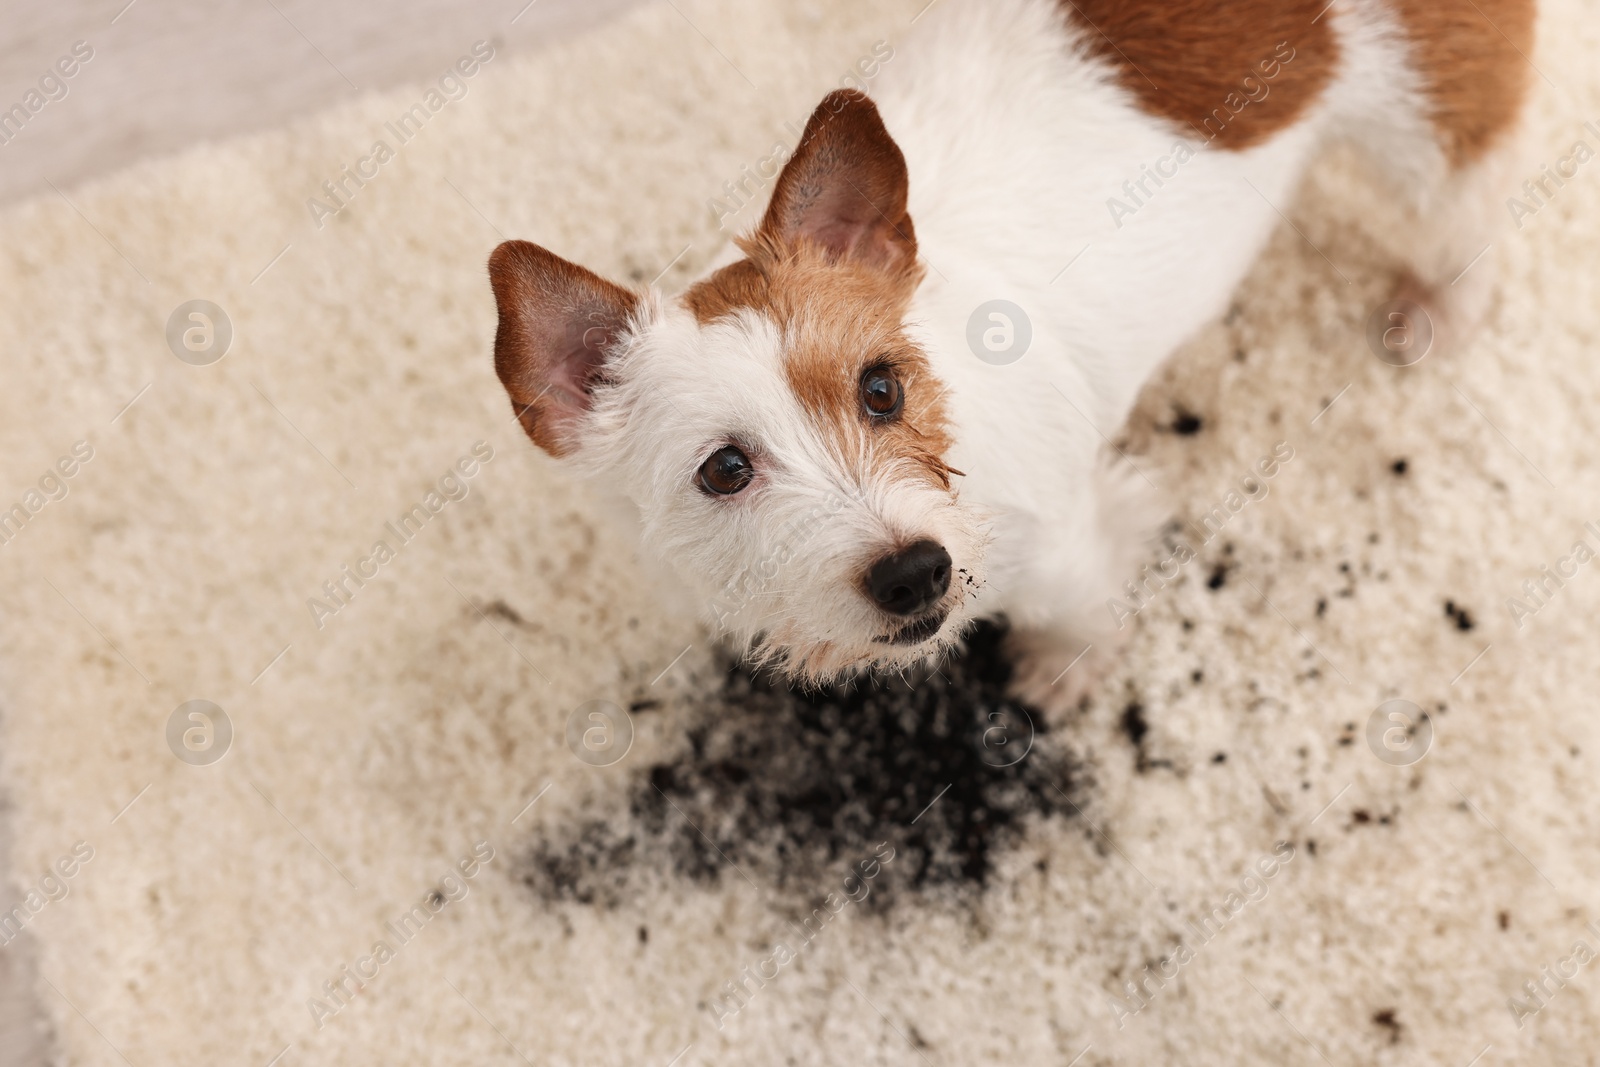 Photo of Cute dog near mud stain on rug indoors, above view